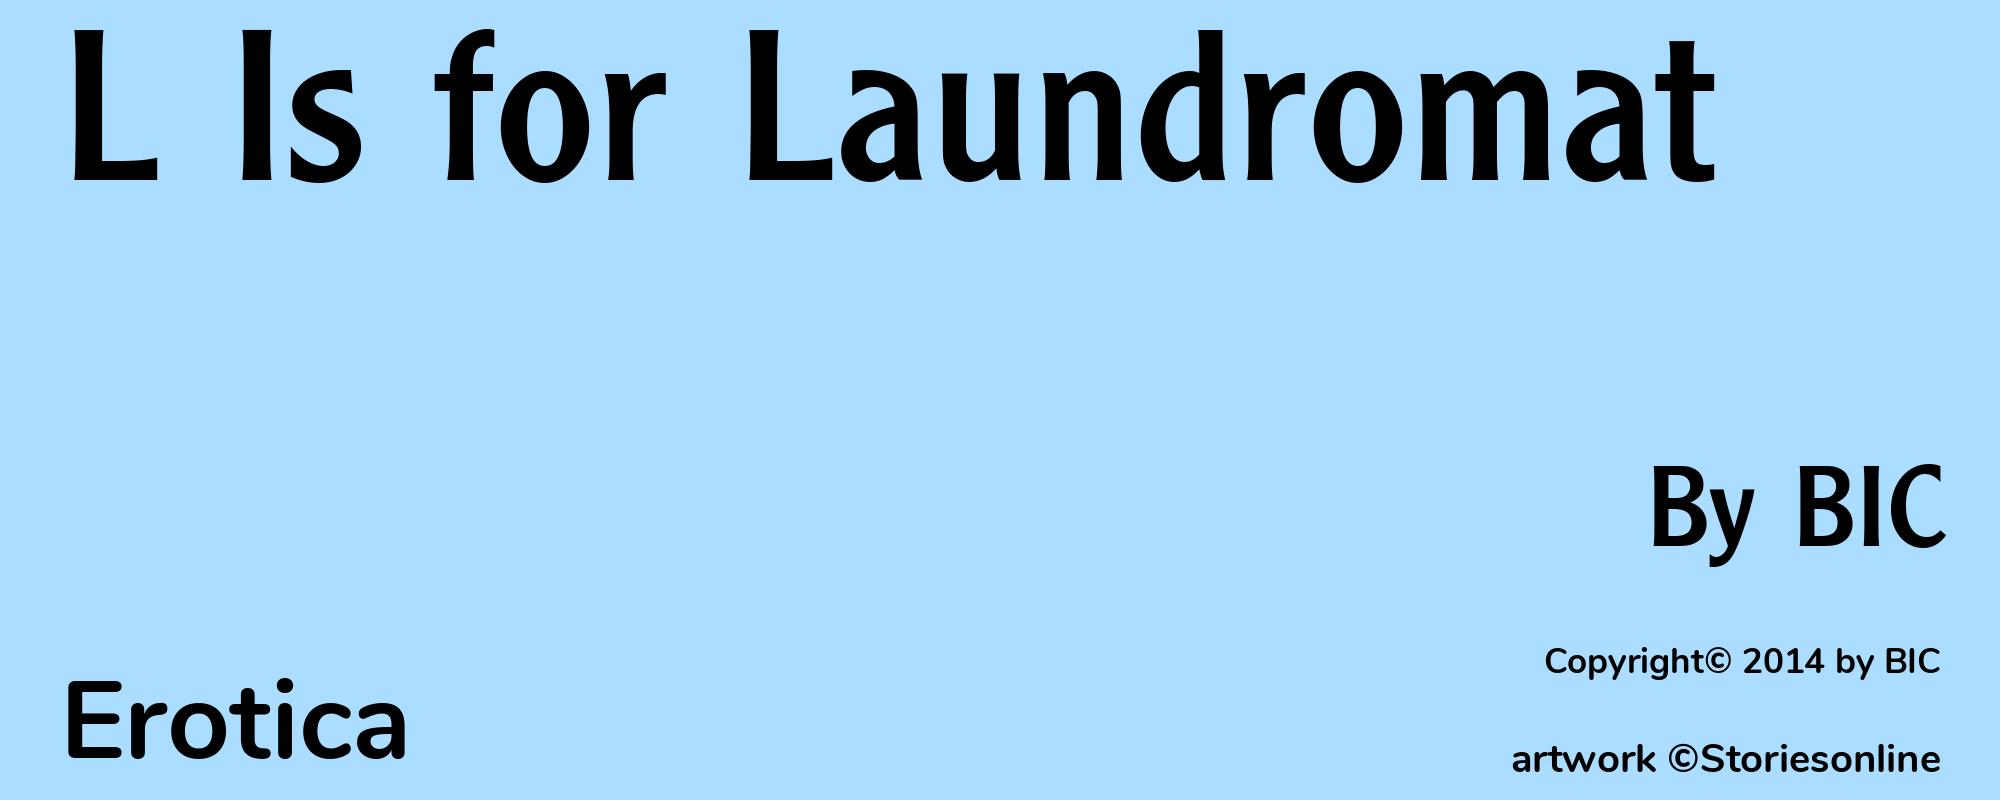 L Is for Laundromat - Cover